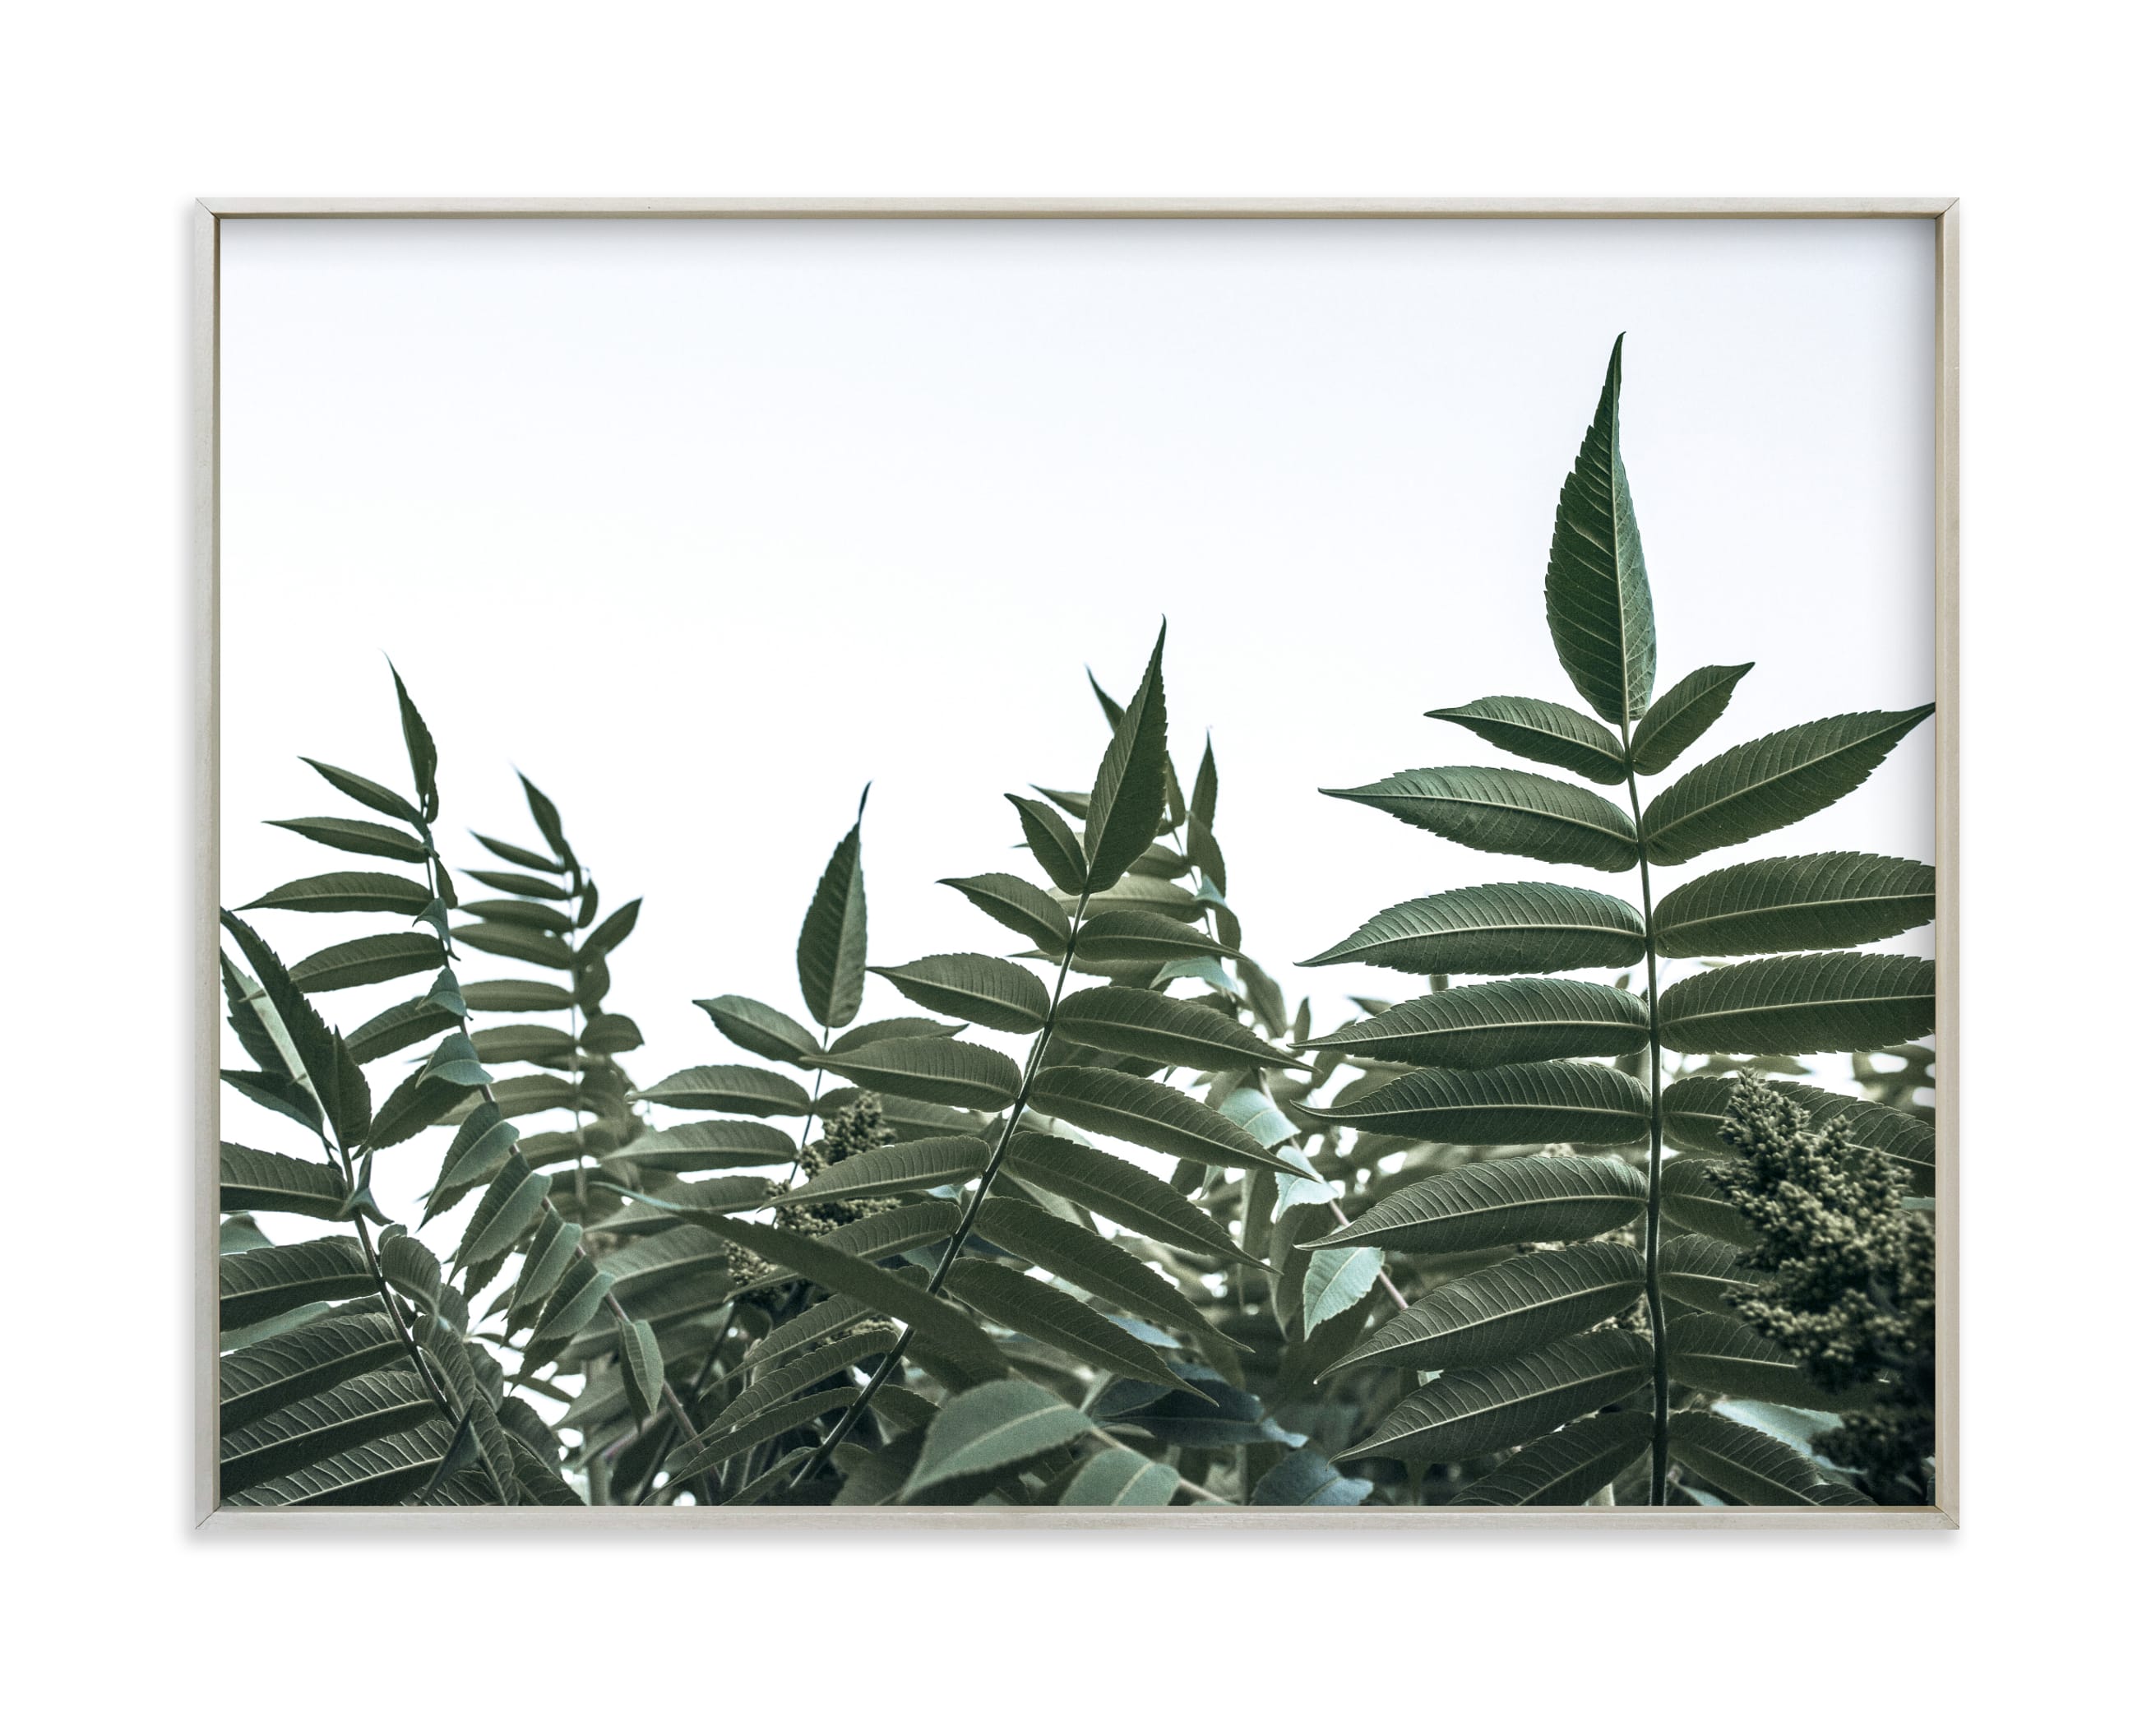 "Green leaves on white" by Lying on the grass in beautiful frame options and a variety of sizes.